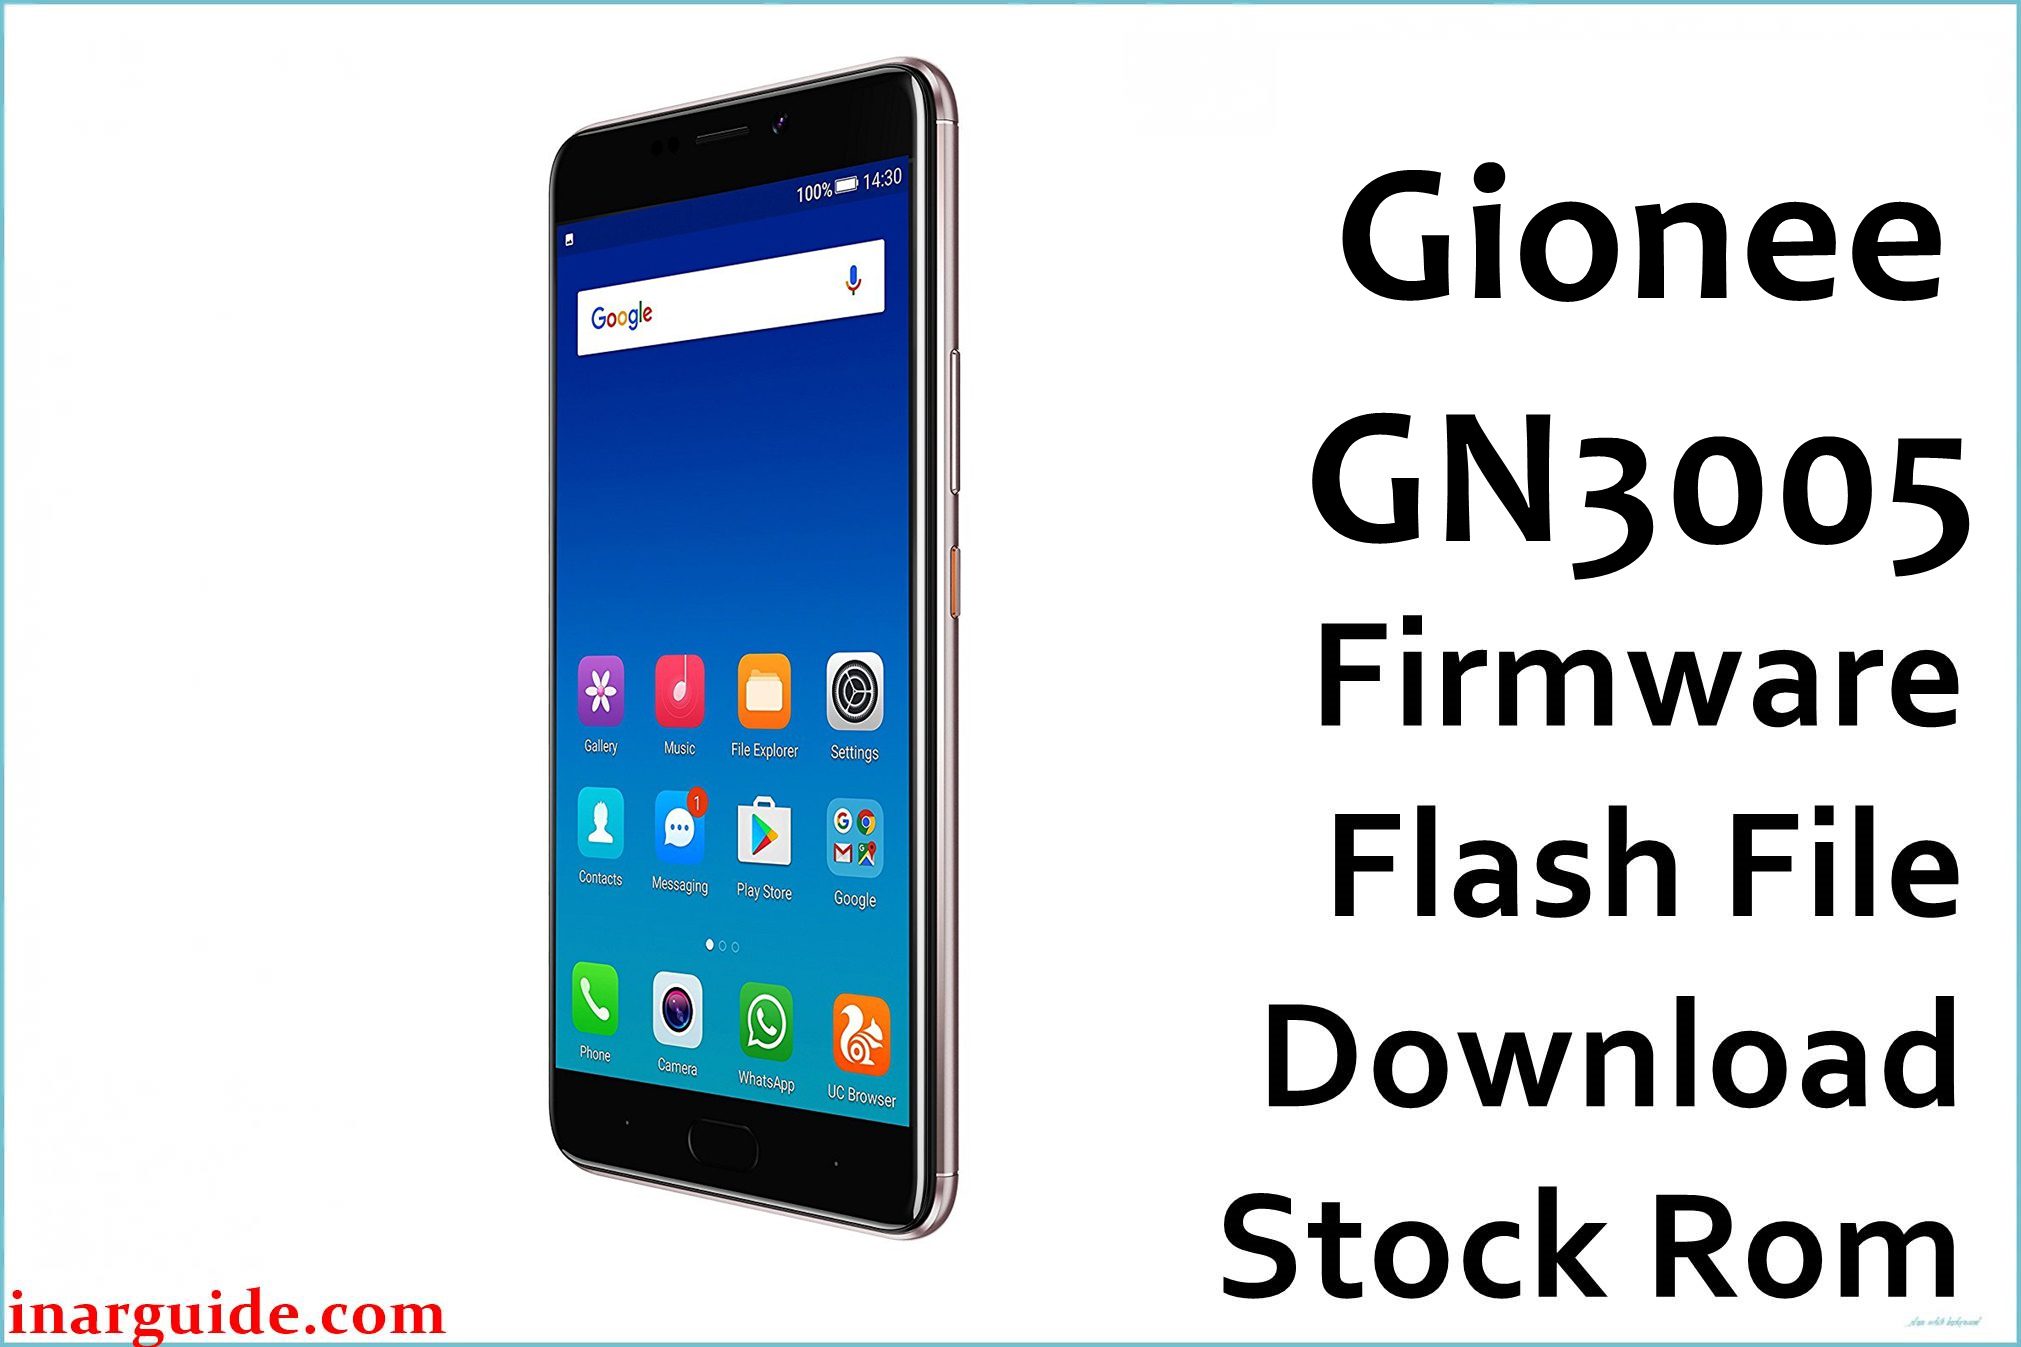 Gionee GN3005